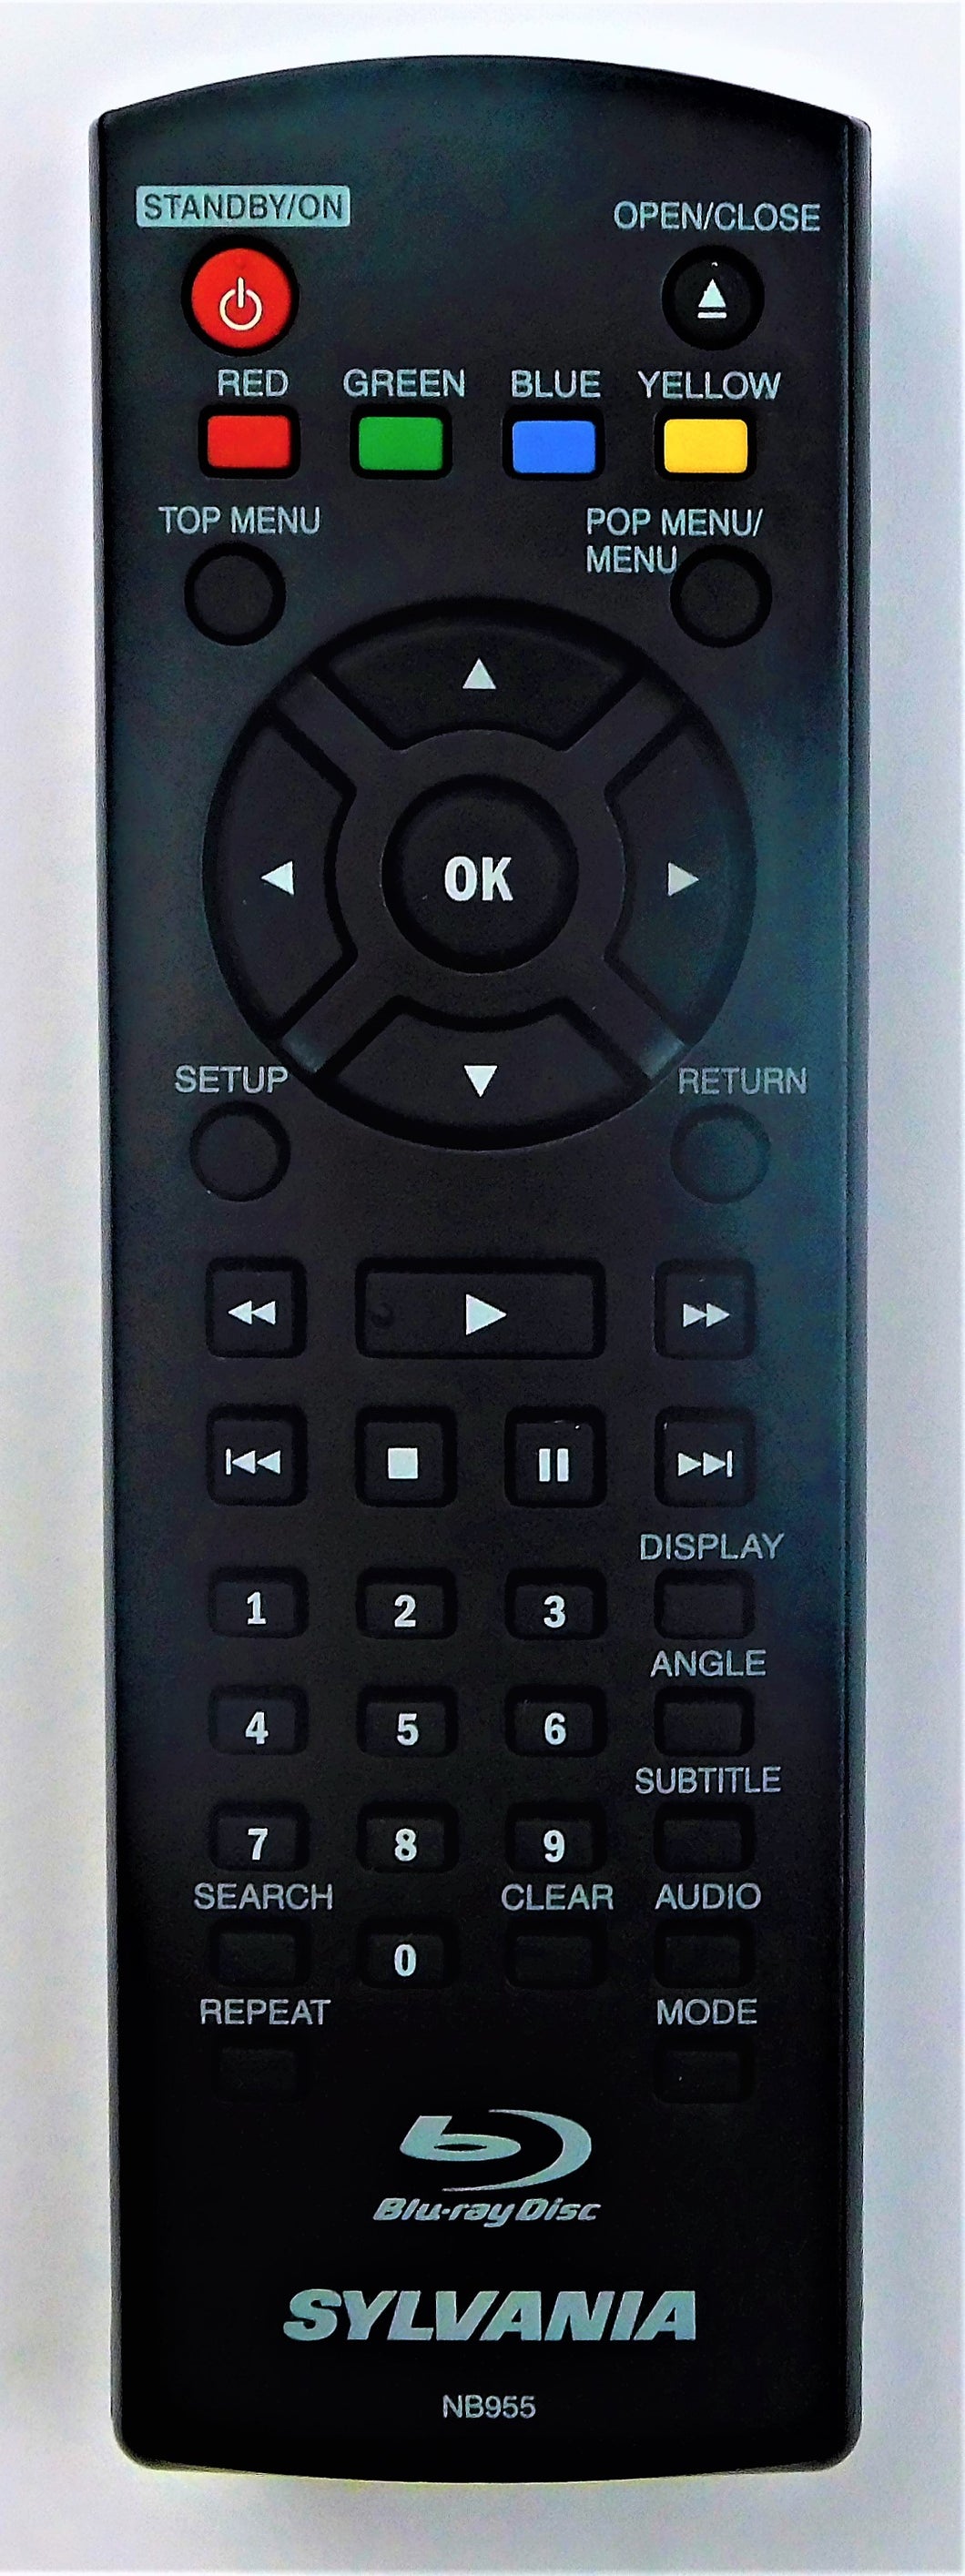 Original OEM replacement remote control for Sylvania Blu-ray players NB955UD